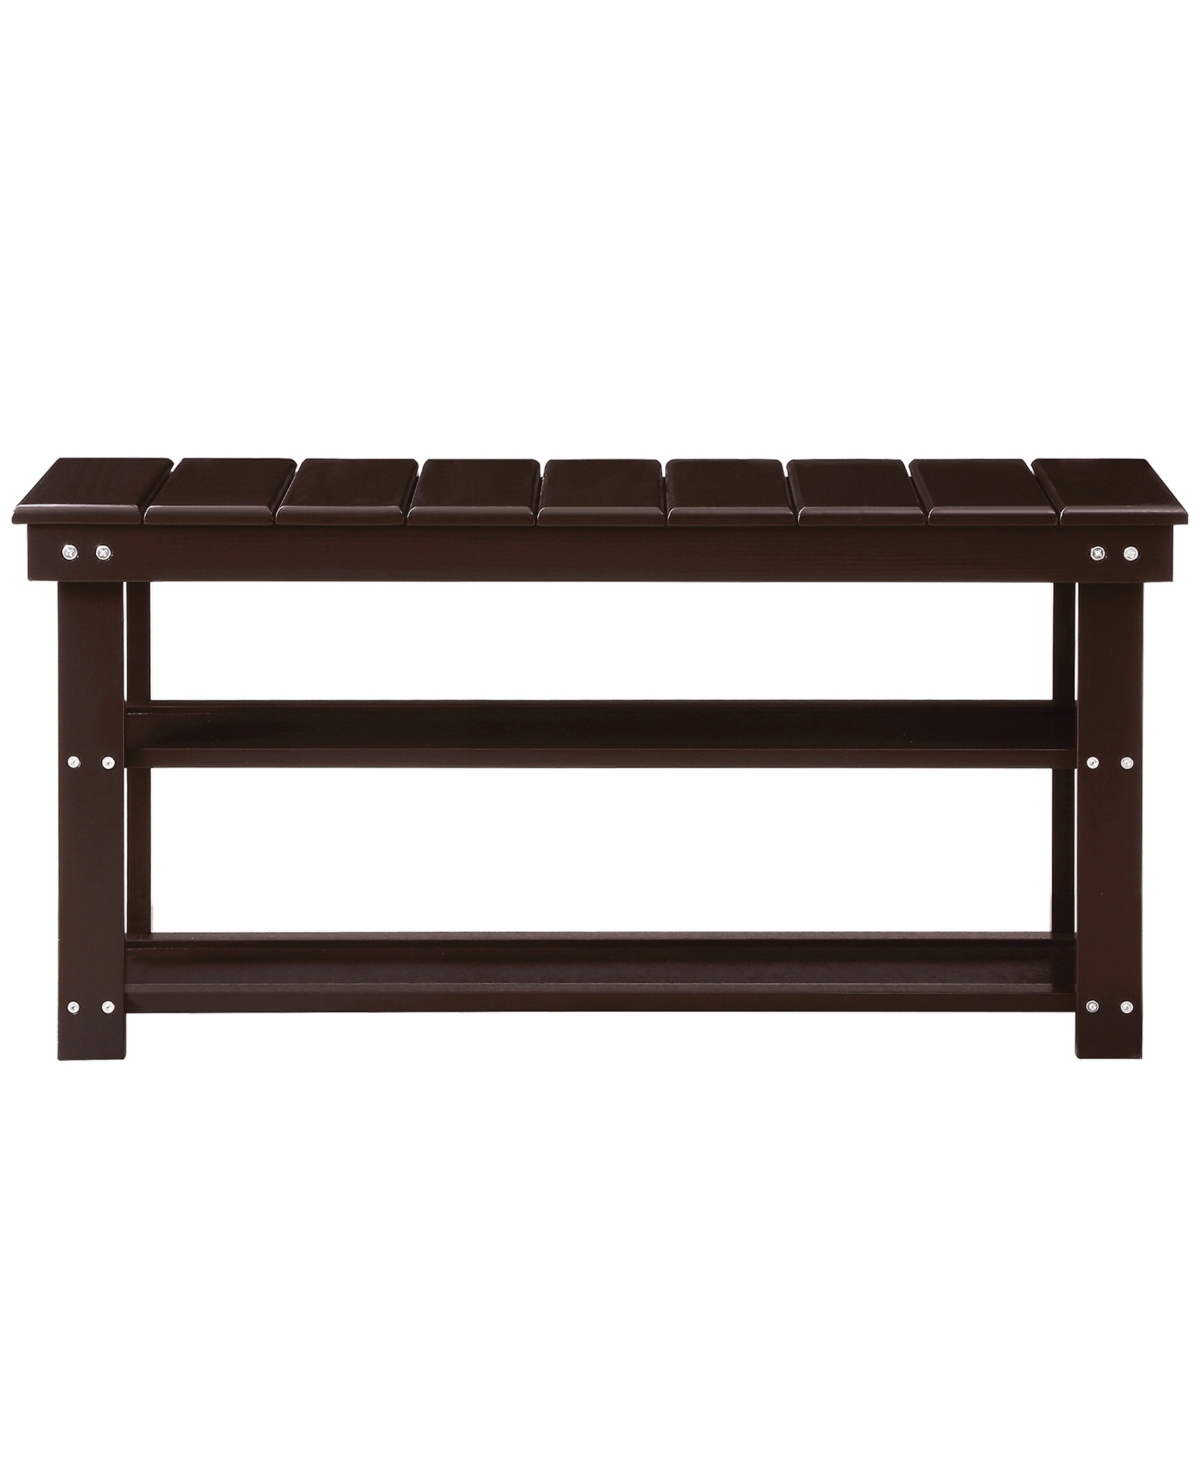 Convenience Concepts 35.5" Mdf Oxford Utility Mudroom Bench With Shelves In Espresso